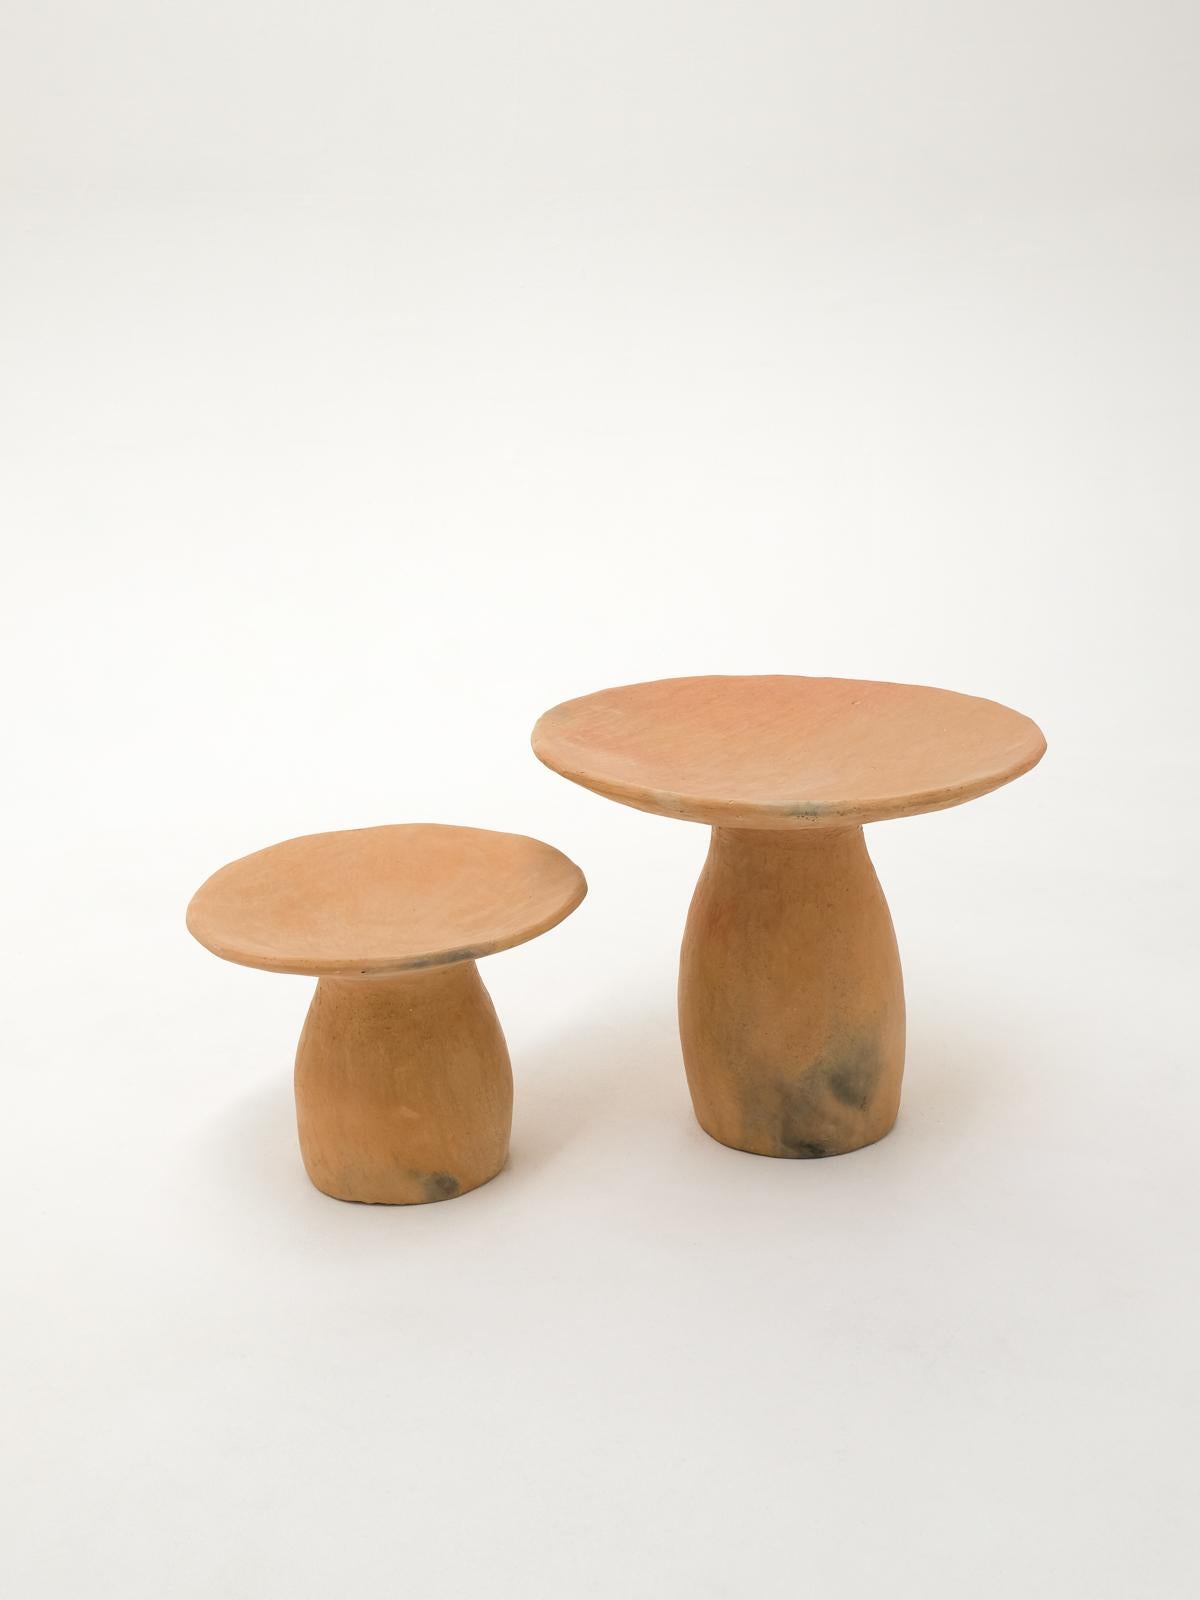 Terracotta contemporary Side Table Made of Clay, Handcrafted by the Potter Houda For Sale 6